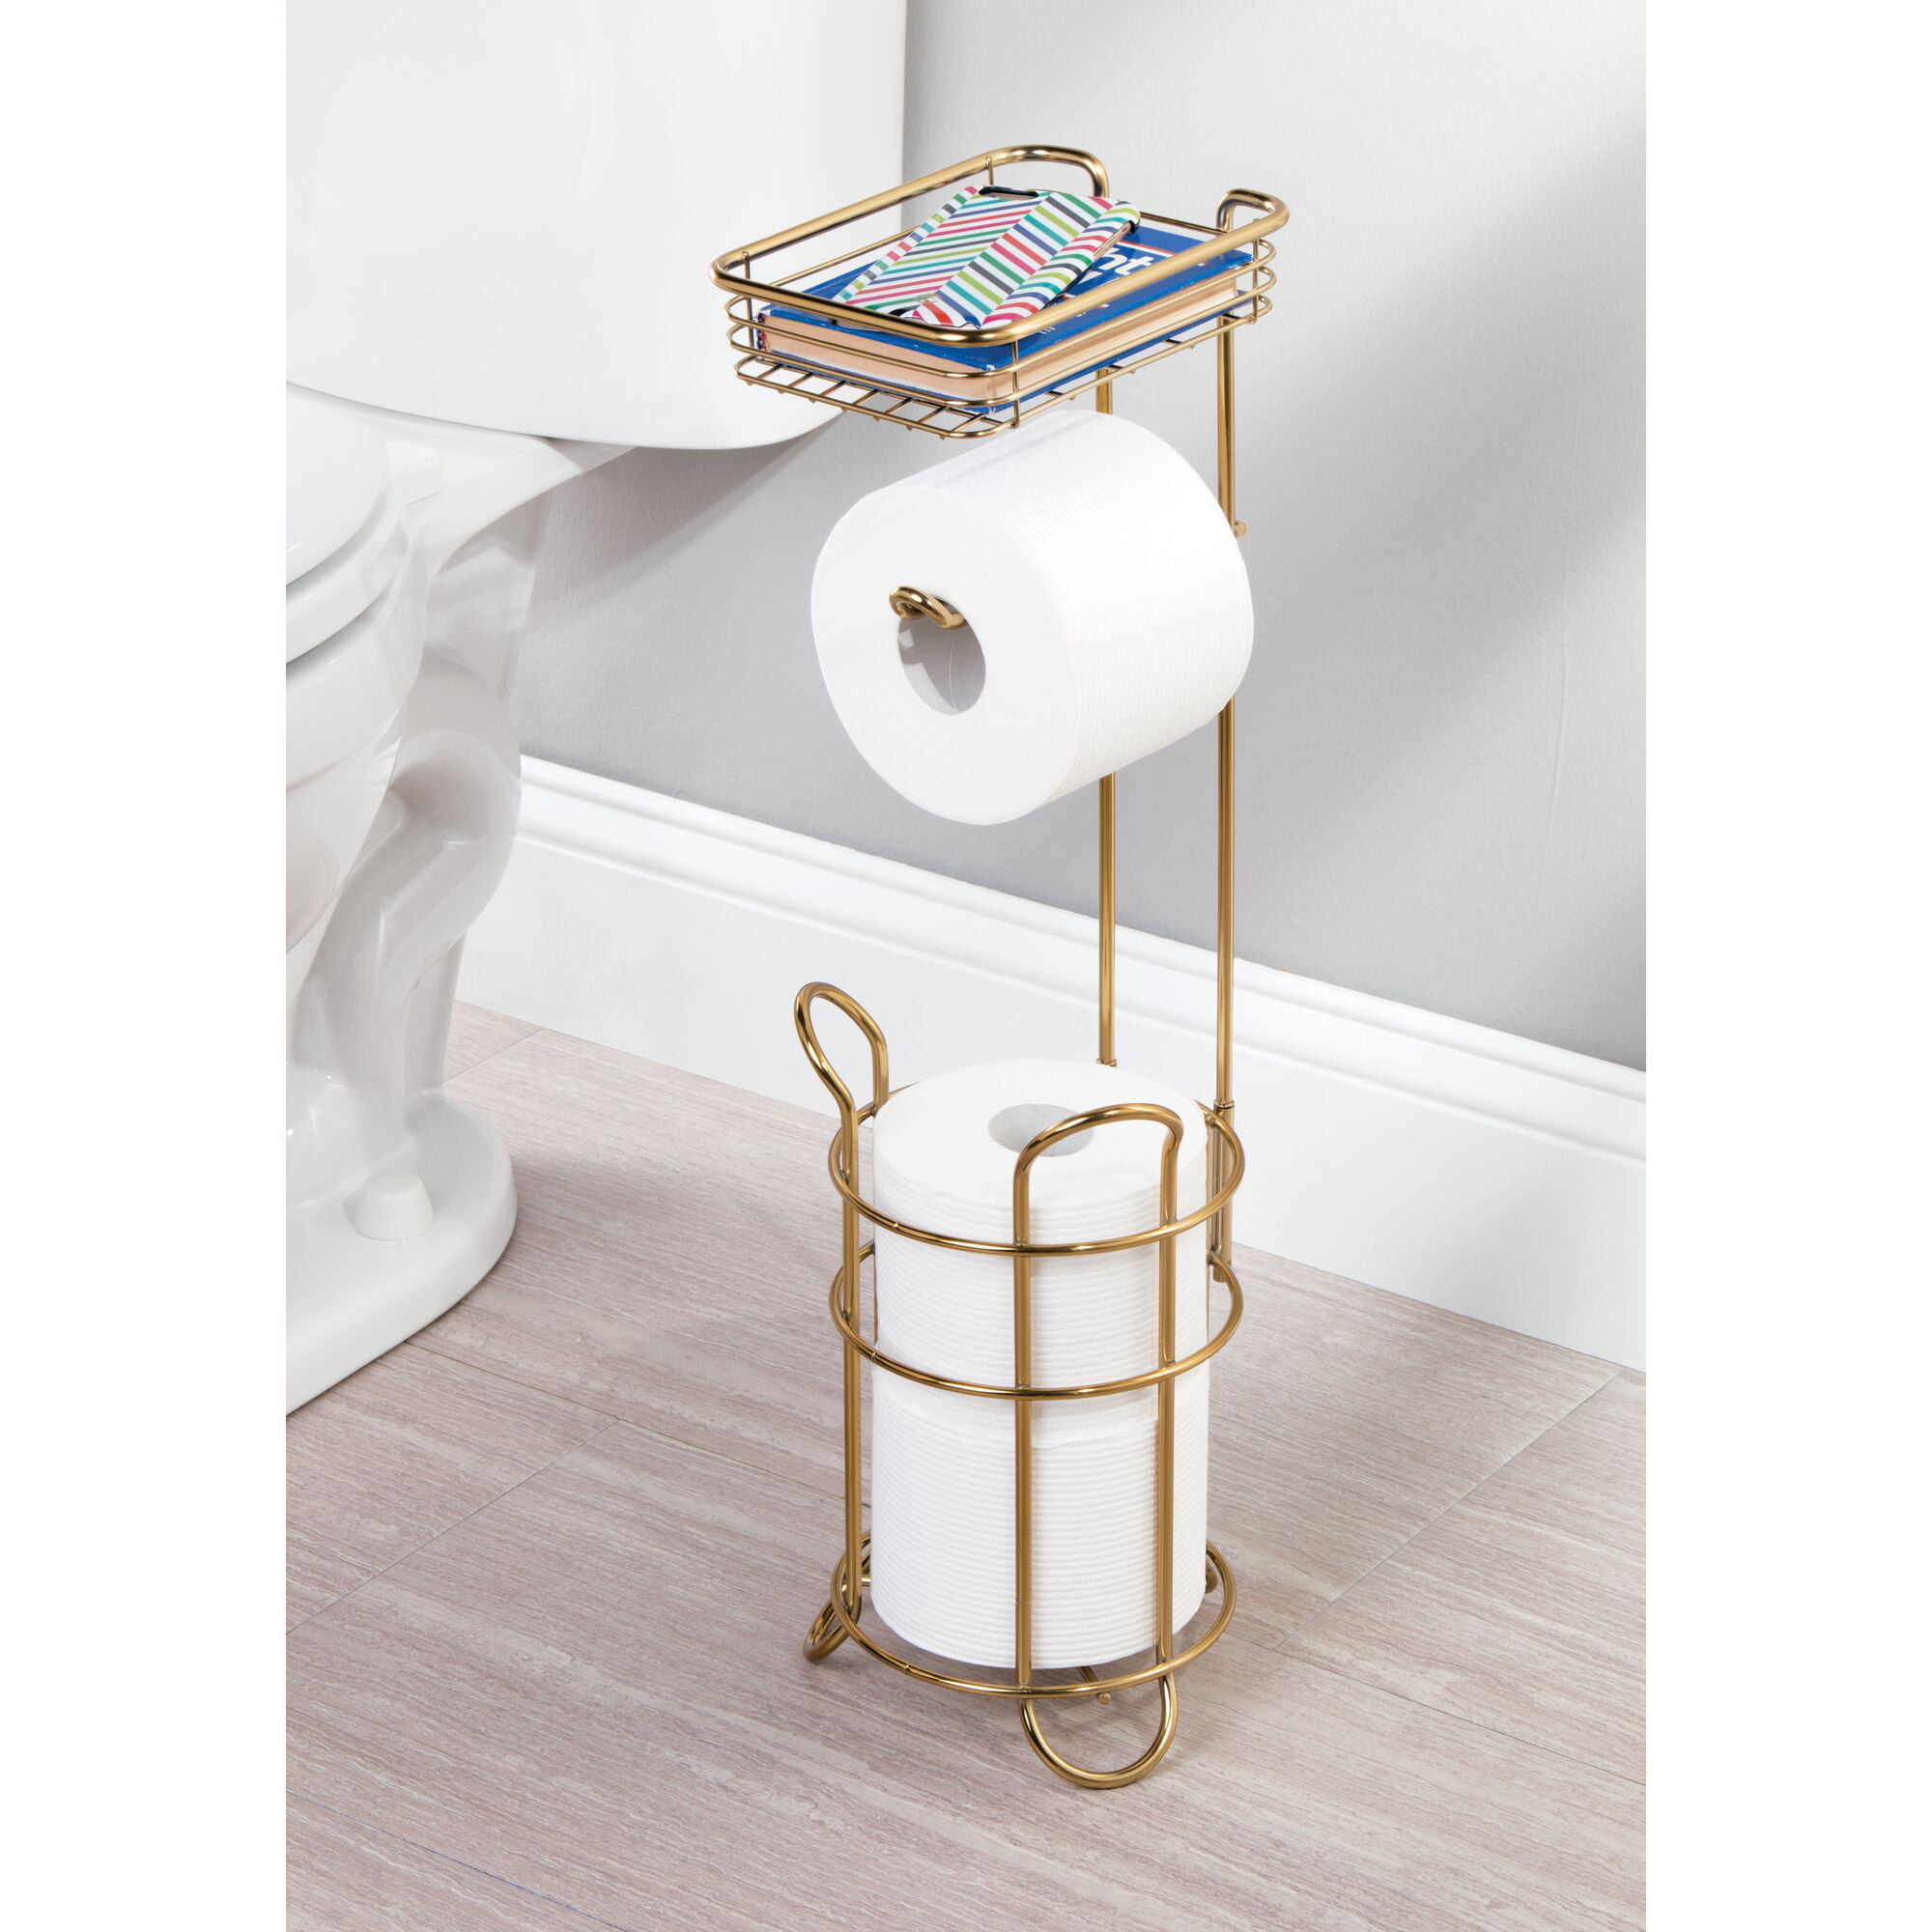 Free-Standing Toilet Roll Holder and Storage Basket Unit Toilet Paper Dispenser for 1 Roll White mDesign Toilet Roll Holder with Storage Shelf 